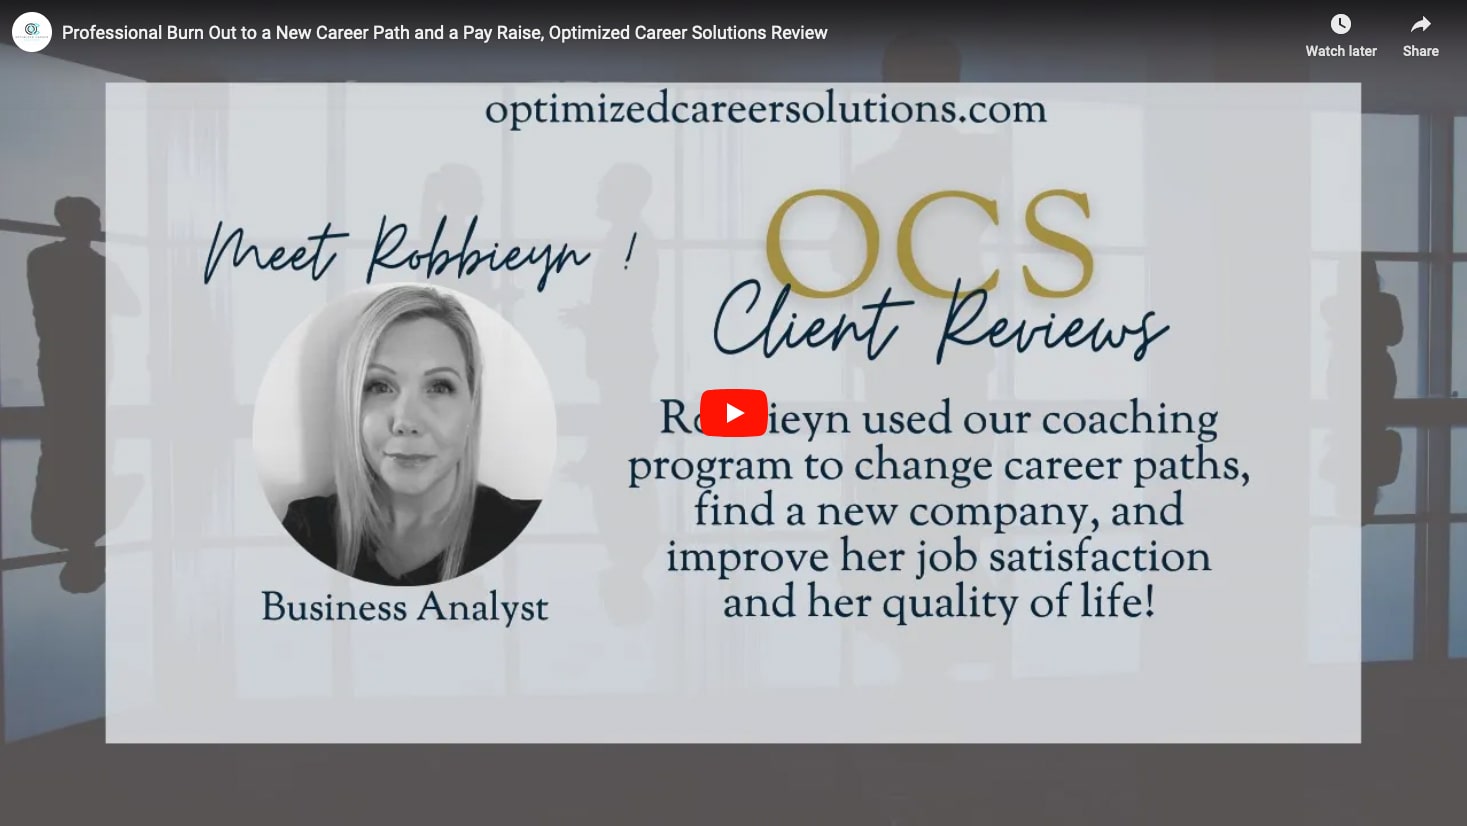 Professional Burn Out to a New Career Path and a Pay Raise, Optimized Career Solutions Review